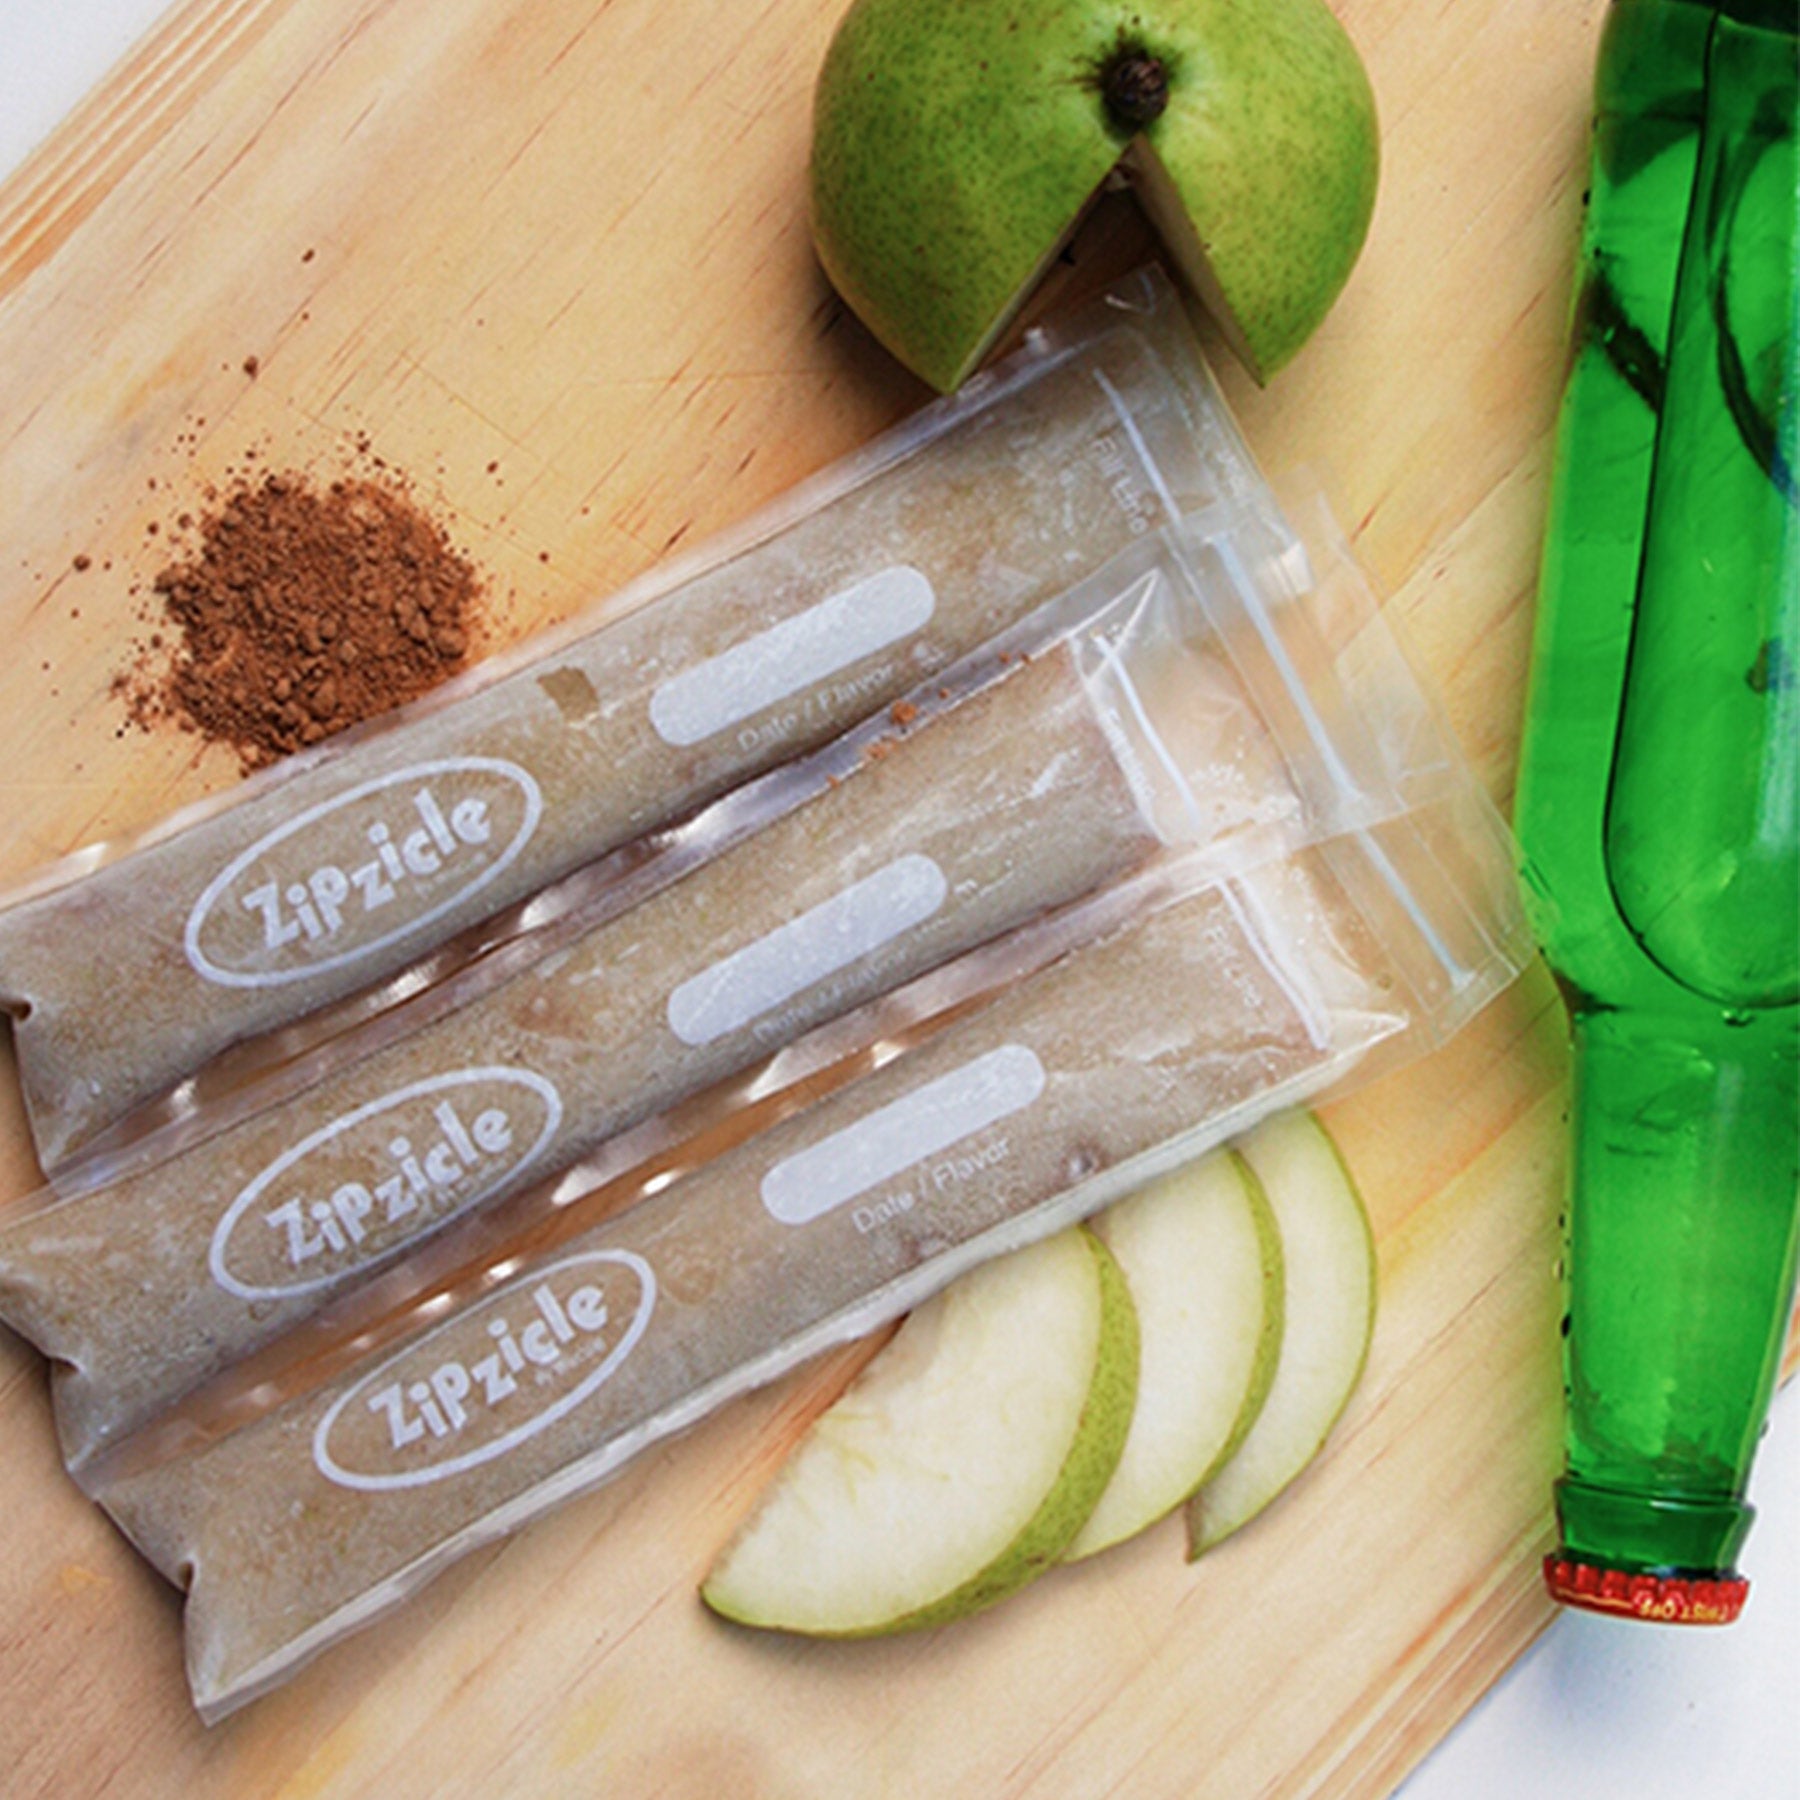 Pear and Ginger Ice Pop